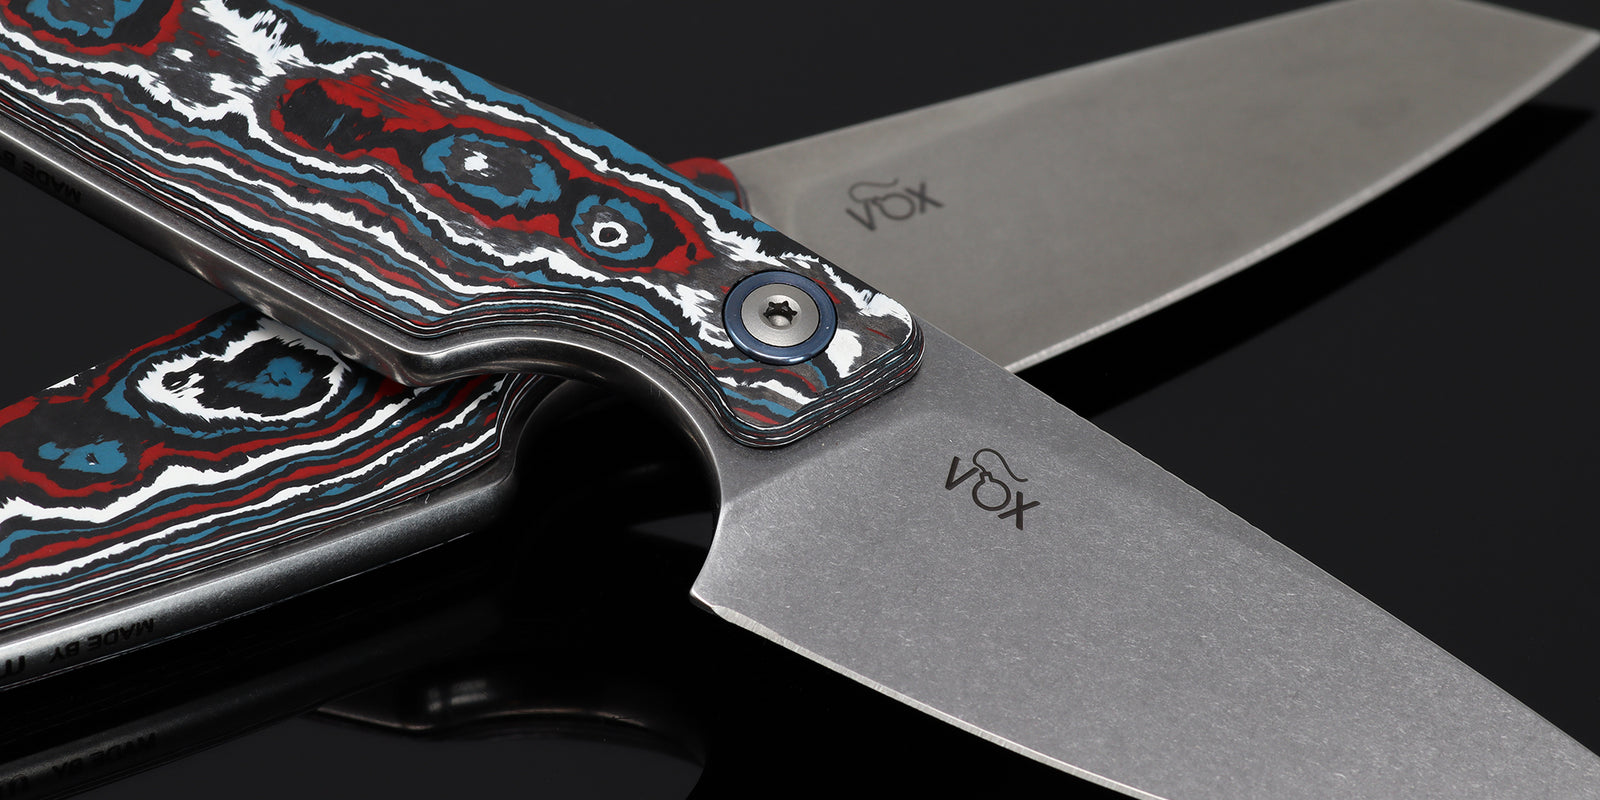 Kaviso x MKM Makro Drop Point Fixed Blade Knife with Fat Carbon Nebula Scales and M390 Stonewashed Blade by Jesper Vox